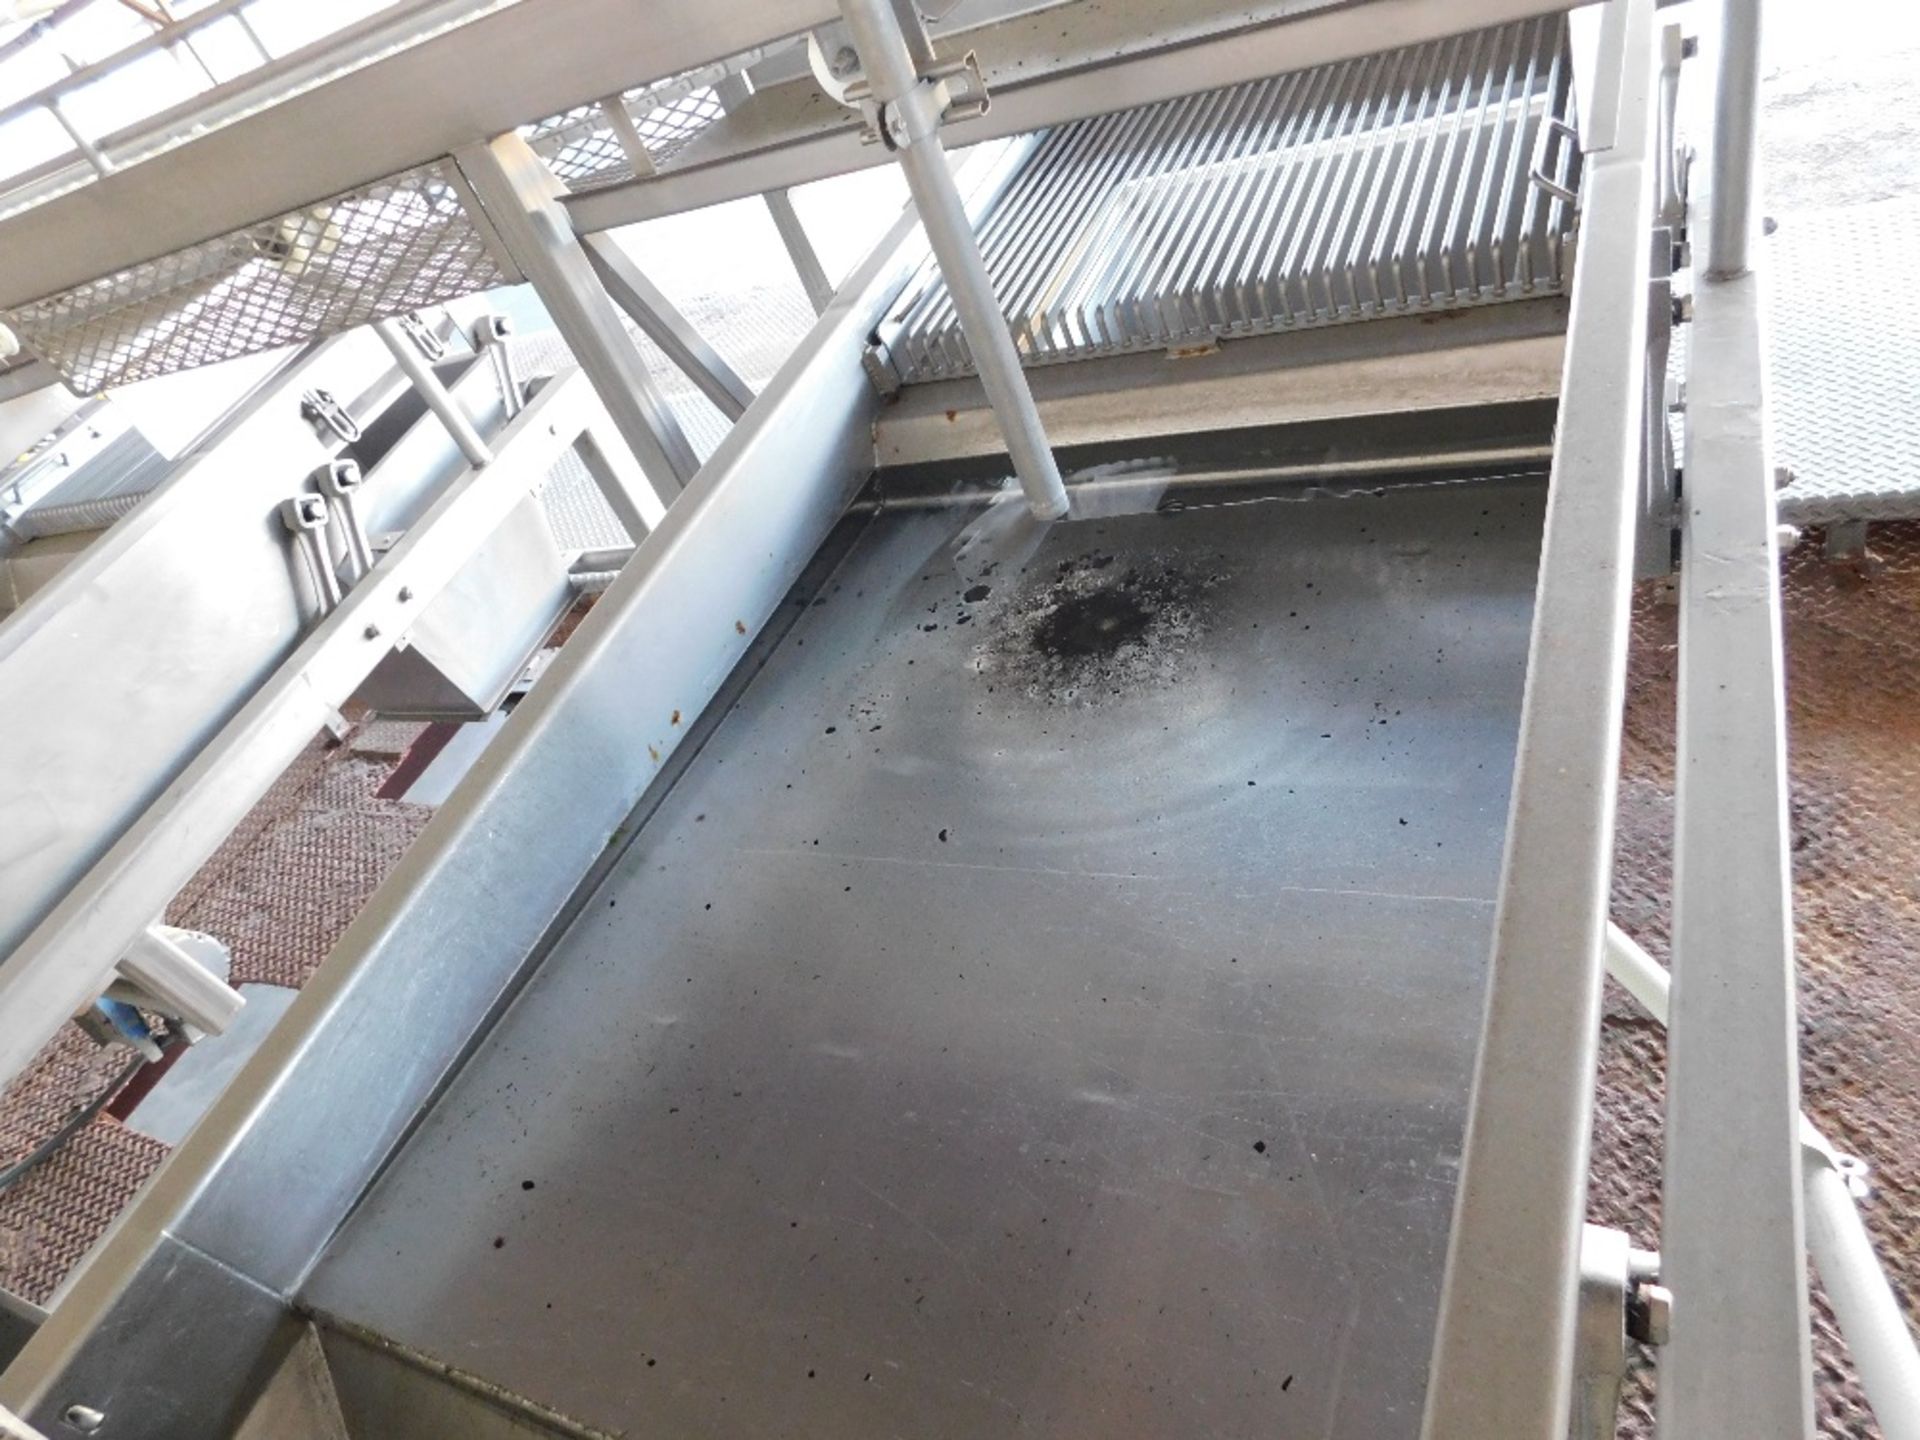 Commercial 30" x 10' S.S. Vibratory Wash & Feed - Image 3 of 3